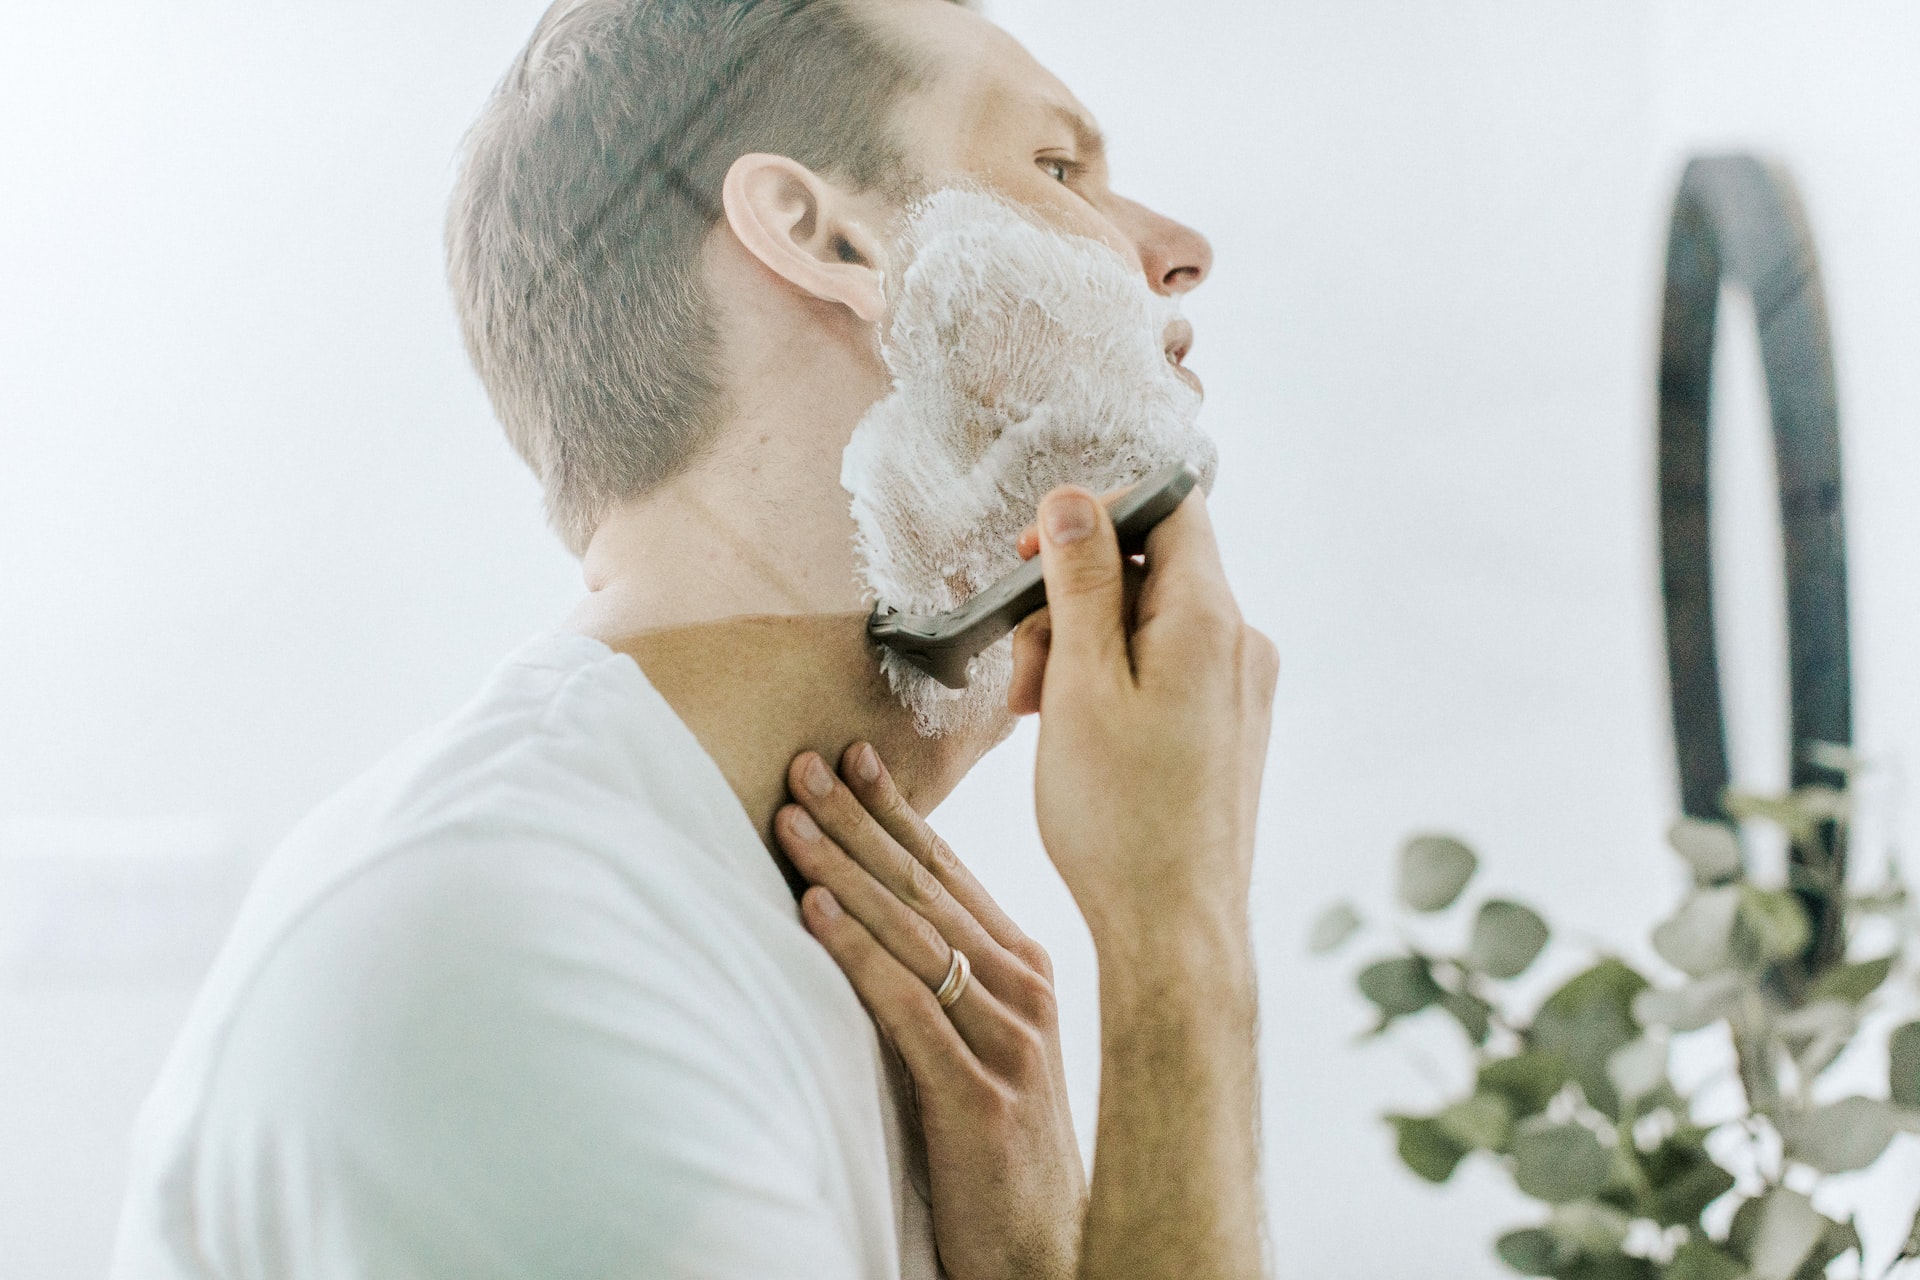 man shaving in front of a mirror